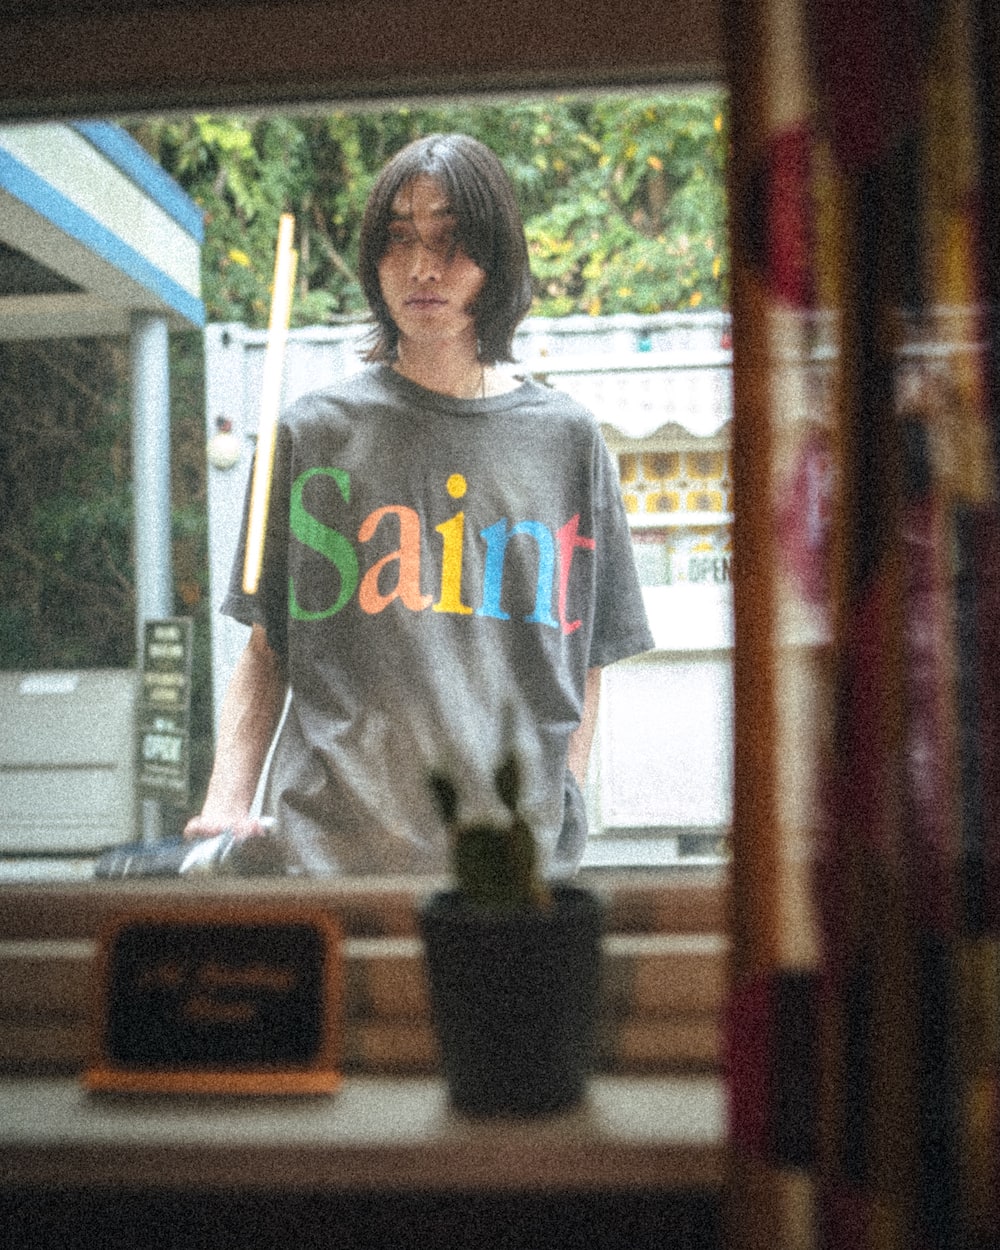 SAINT MICHAEL 2024SS - The last items from the SAINT Mxxxxxx 2024 Spring/Summer Collection are now available! In-store and online sales start at 10:00 AM, Japan Standard Time on May 18th (Sat.)! - SM-YS8-0000-001(COLOFUL SAINT Short Sleeve T-shirt) - 1-011